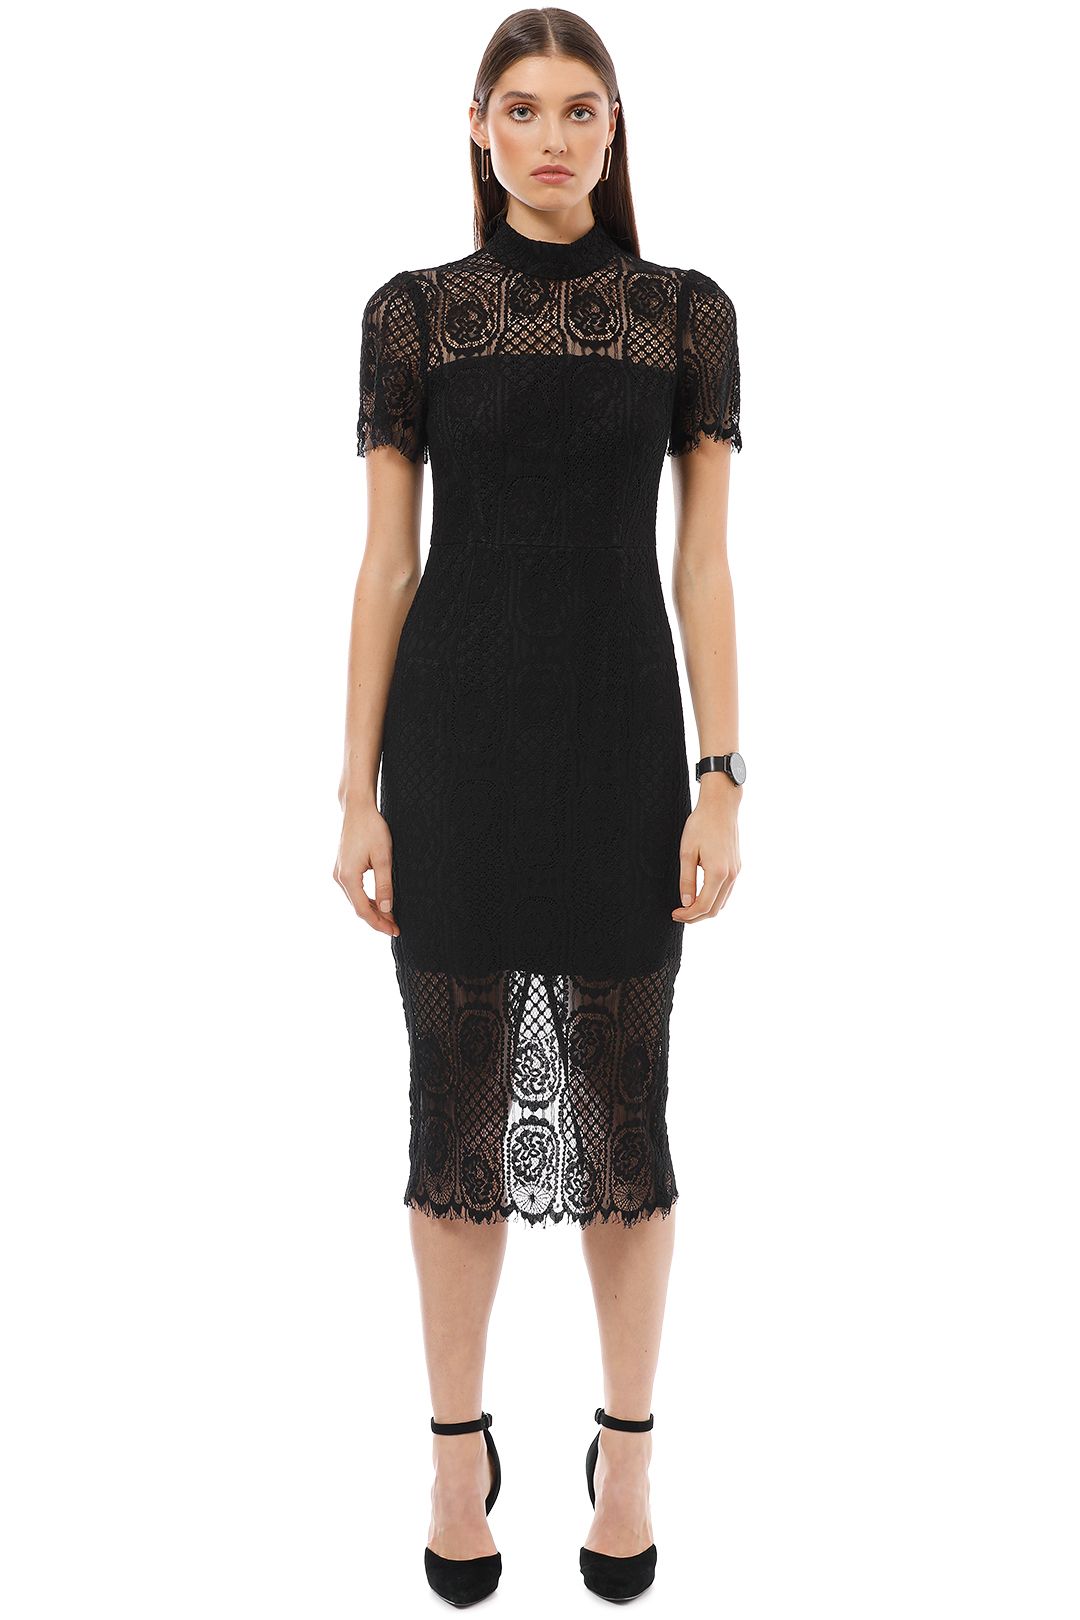 Mossman - Making The Connection Dress - Black - Front